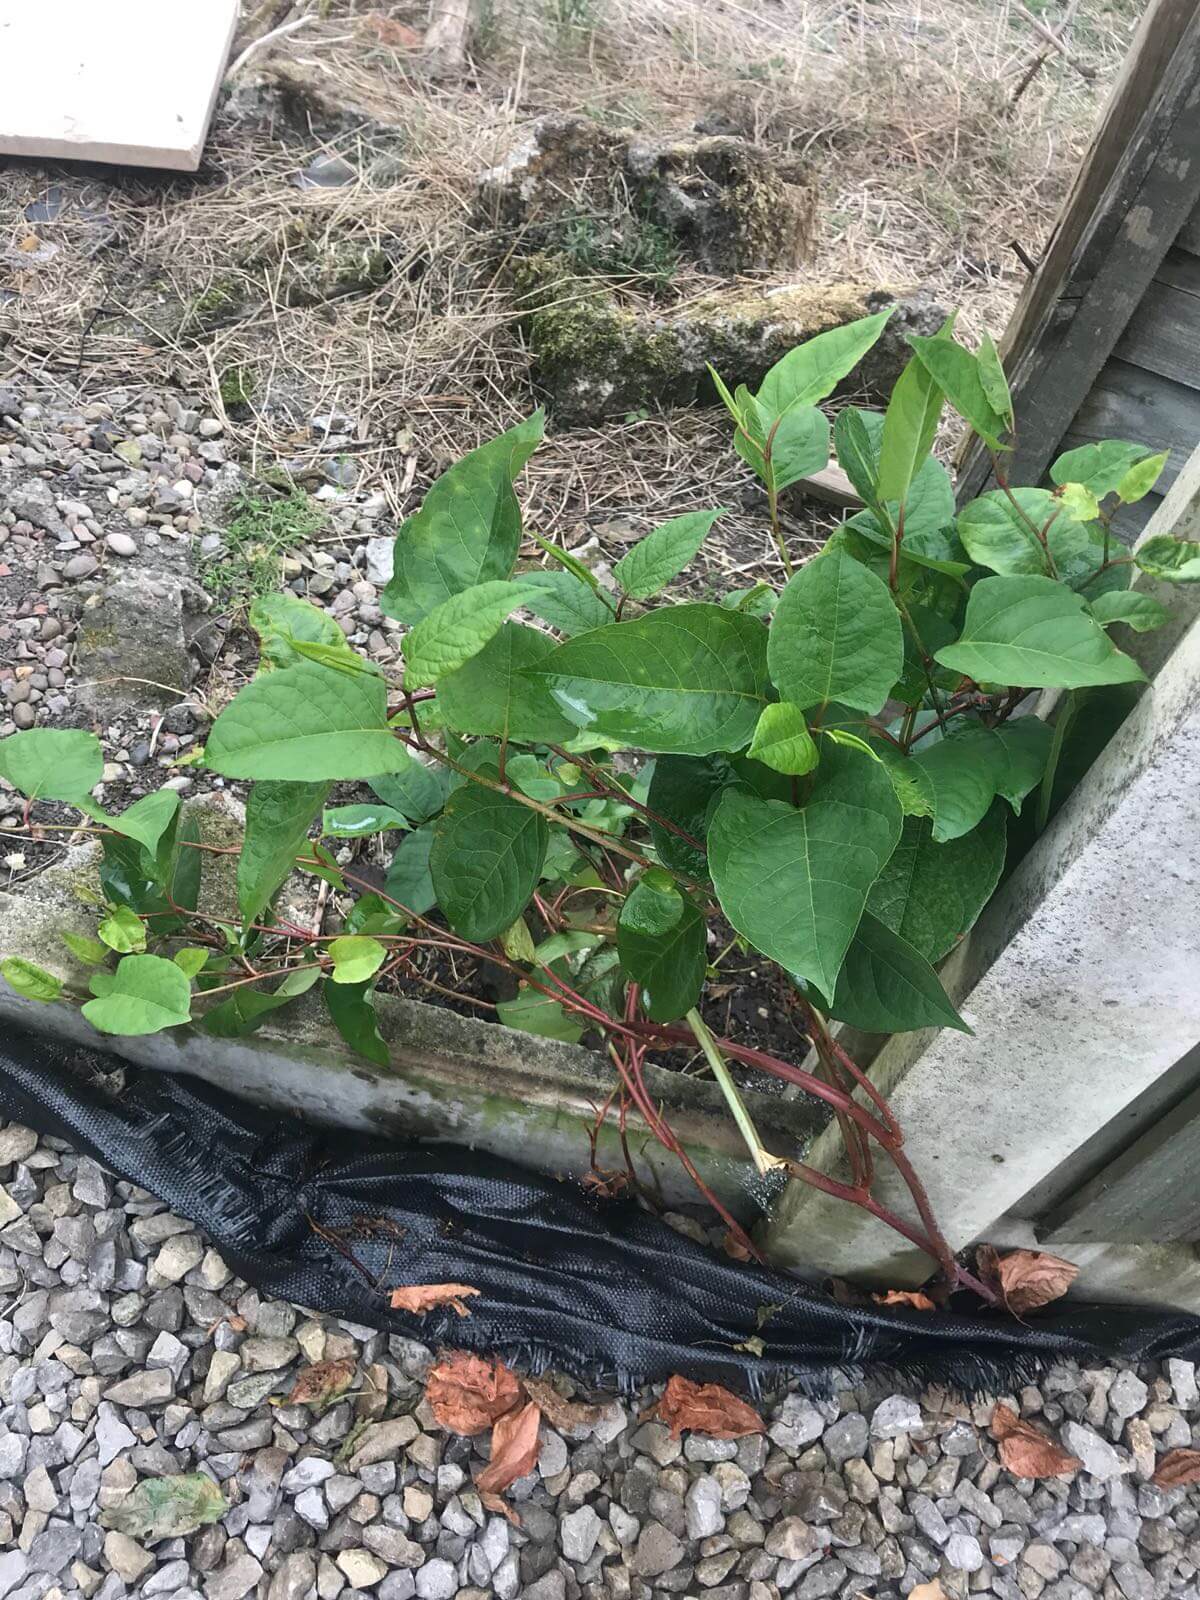 Japanese Knotweed Removal in Dudley